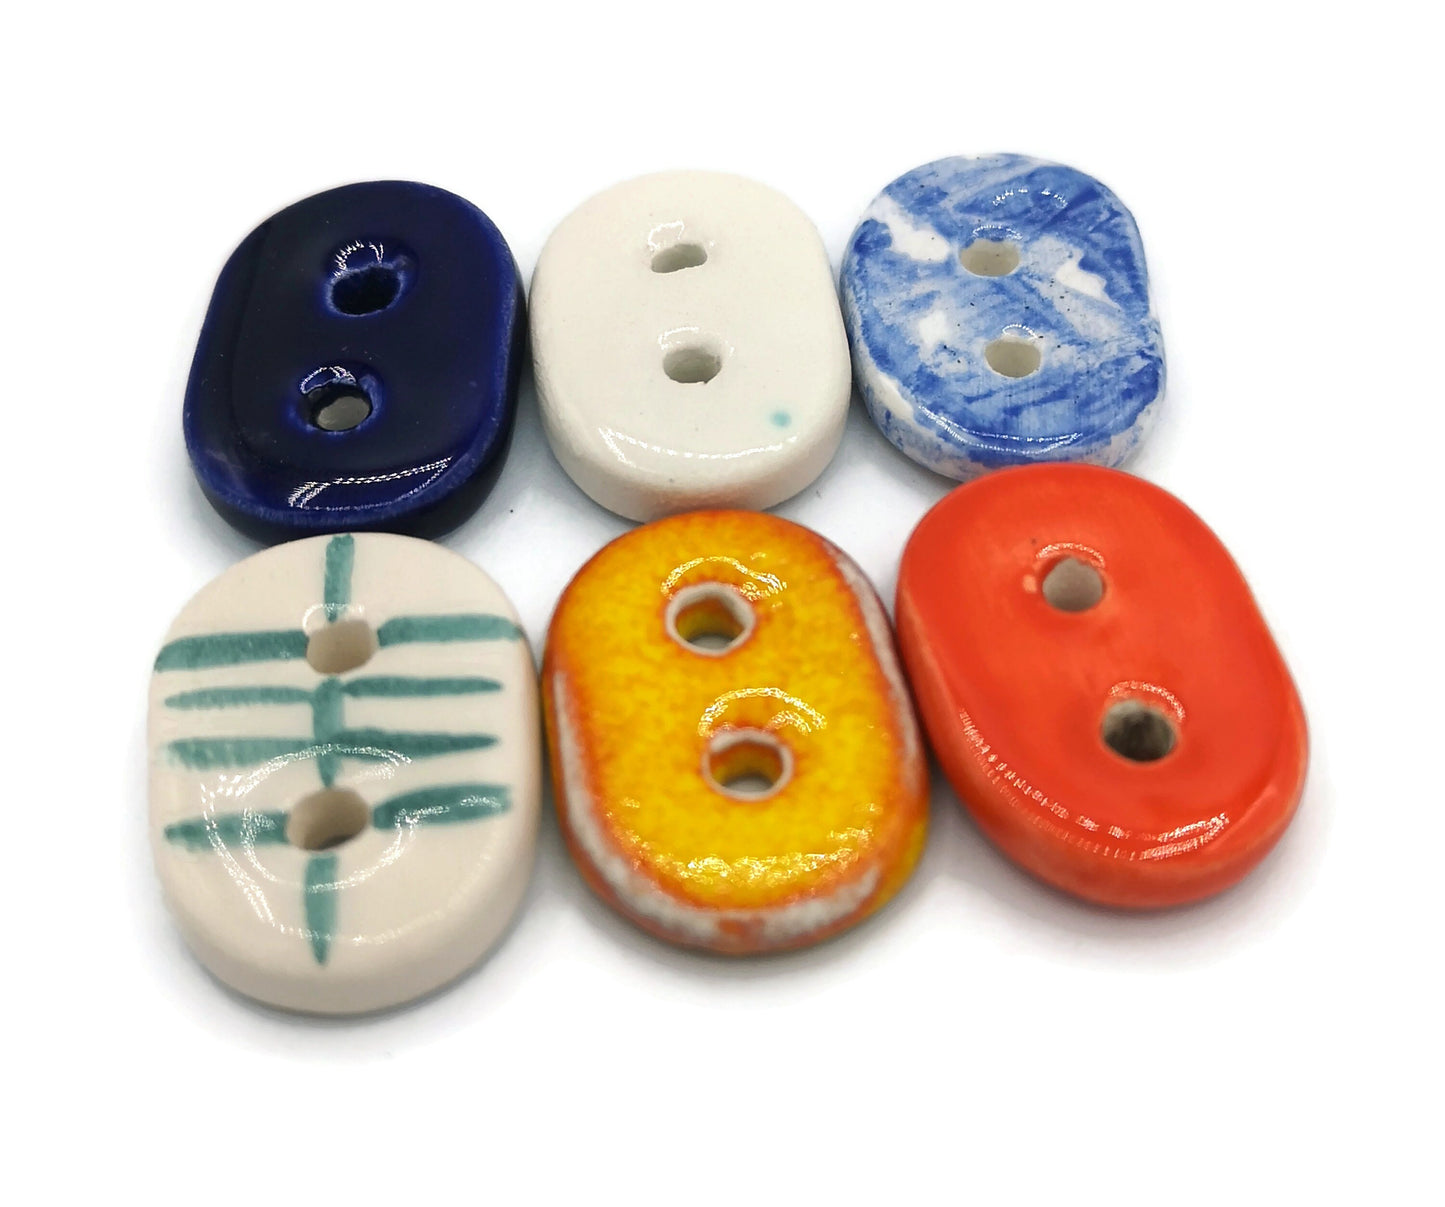 6 Pc 25mm Handmade Ceramic Oval Sewing Buttons, Coat Buttons For Crafts, Best Sellers Sewing Supplies And Notions, Unique Large Buttons - Ceramica Ana Rafael